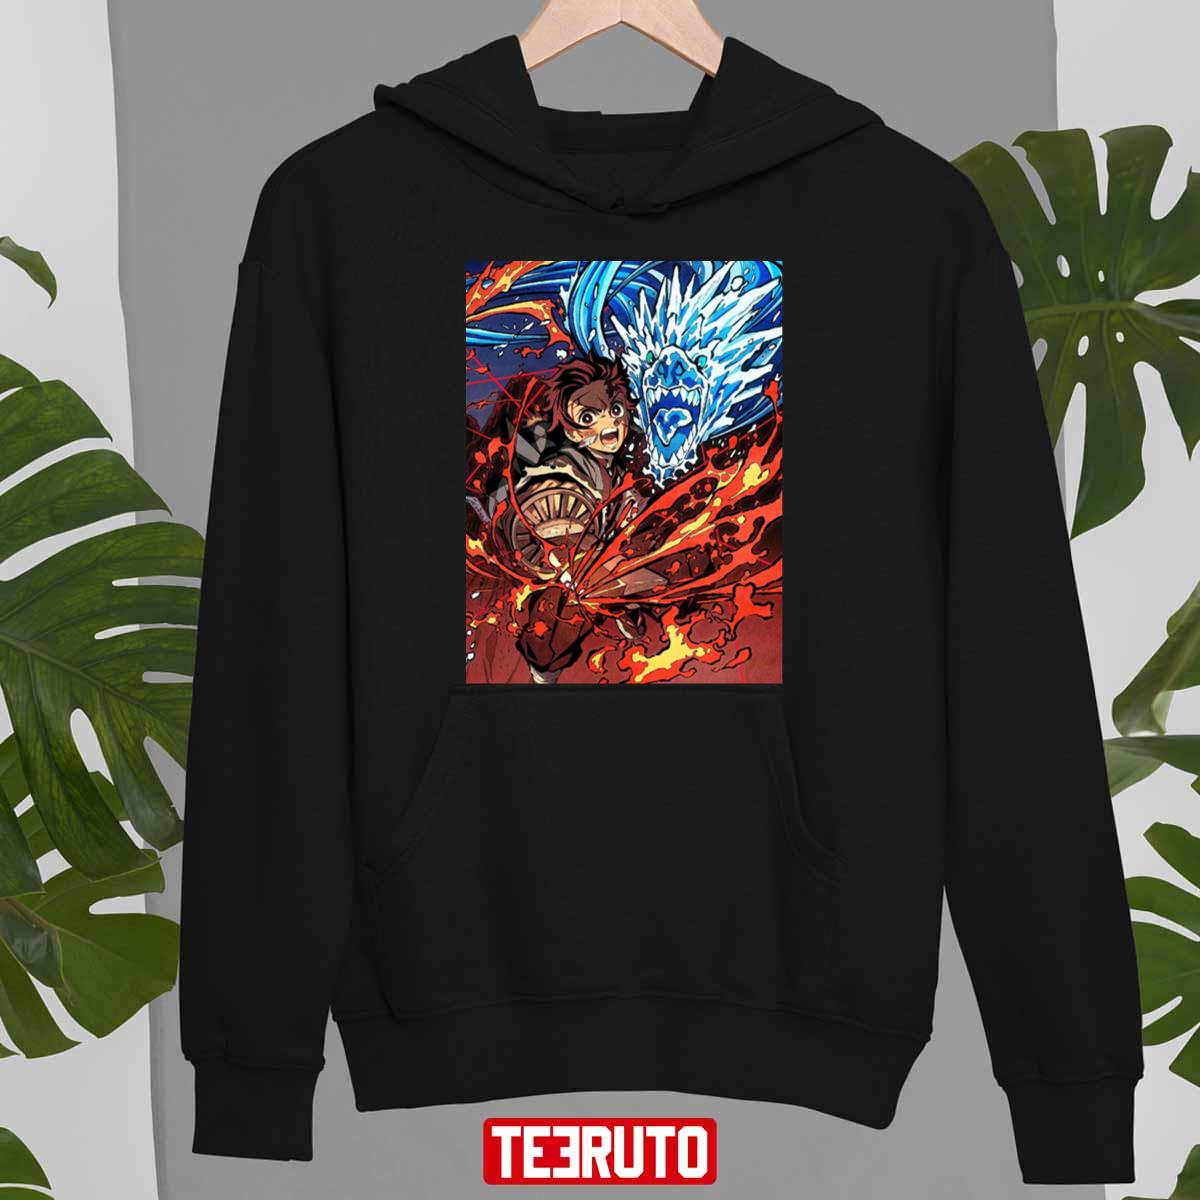 Tan With Power Of Water And Fire Demon Slayer Tangiro Kamado Unisex T ...